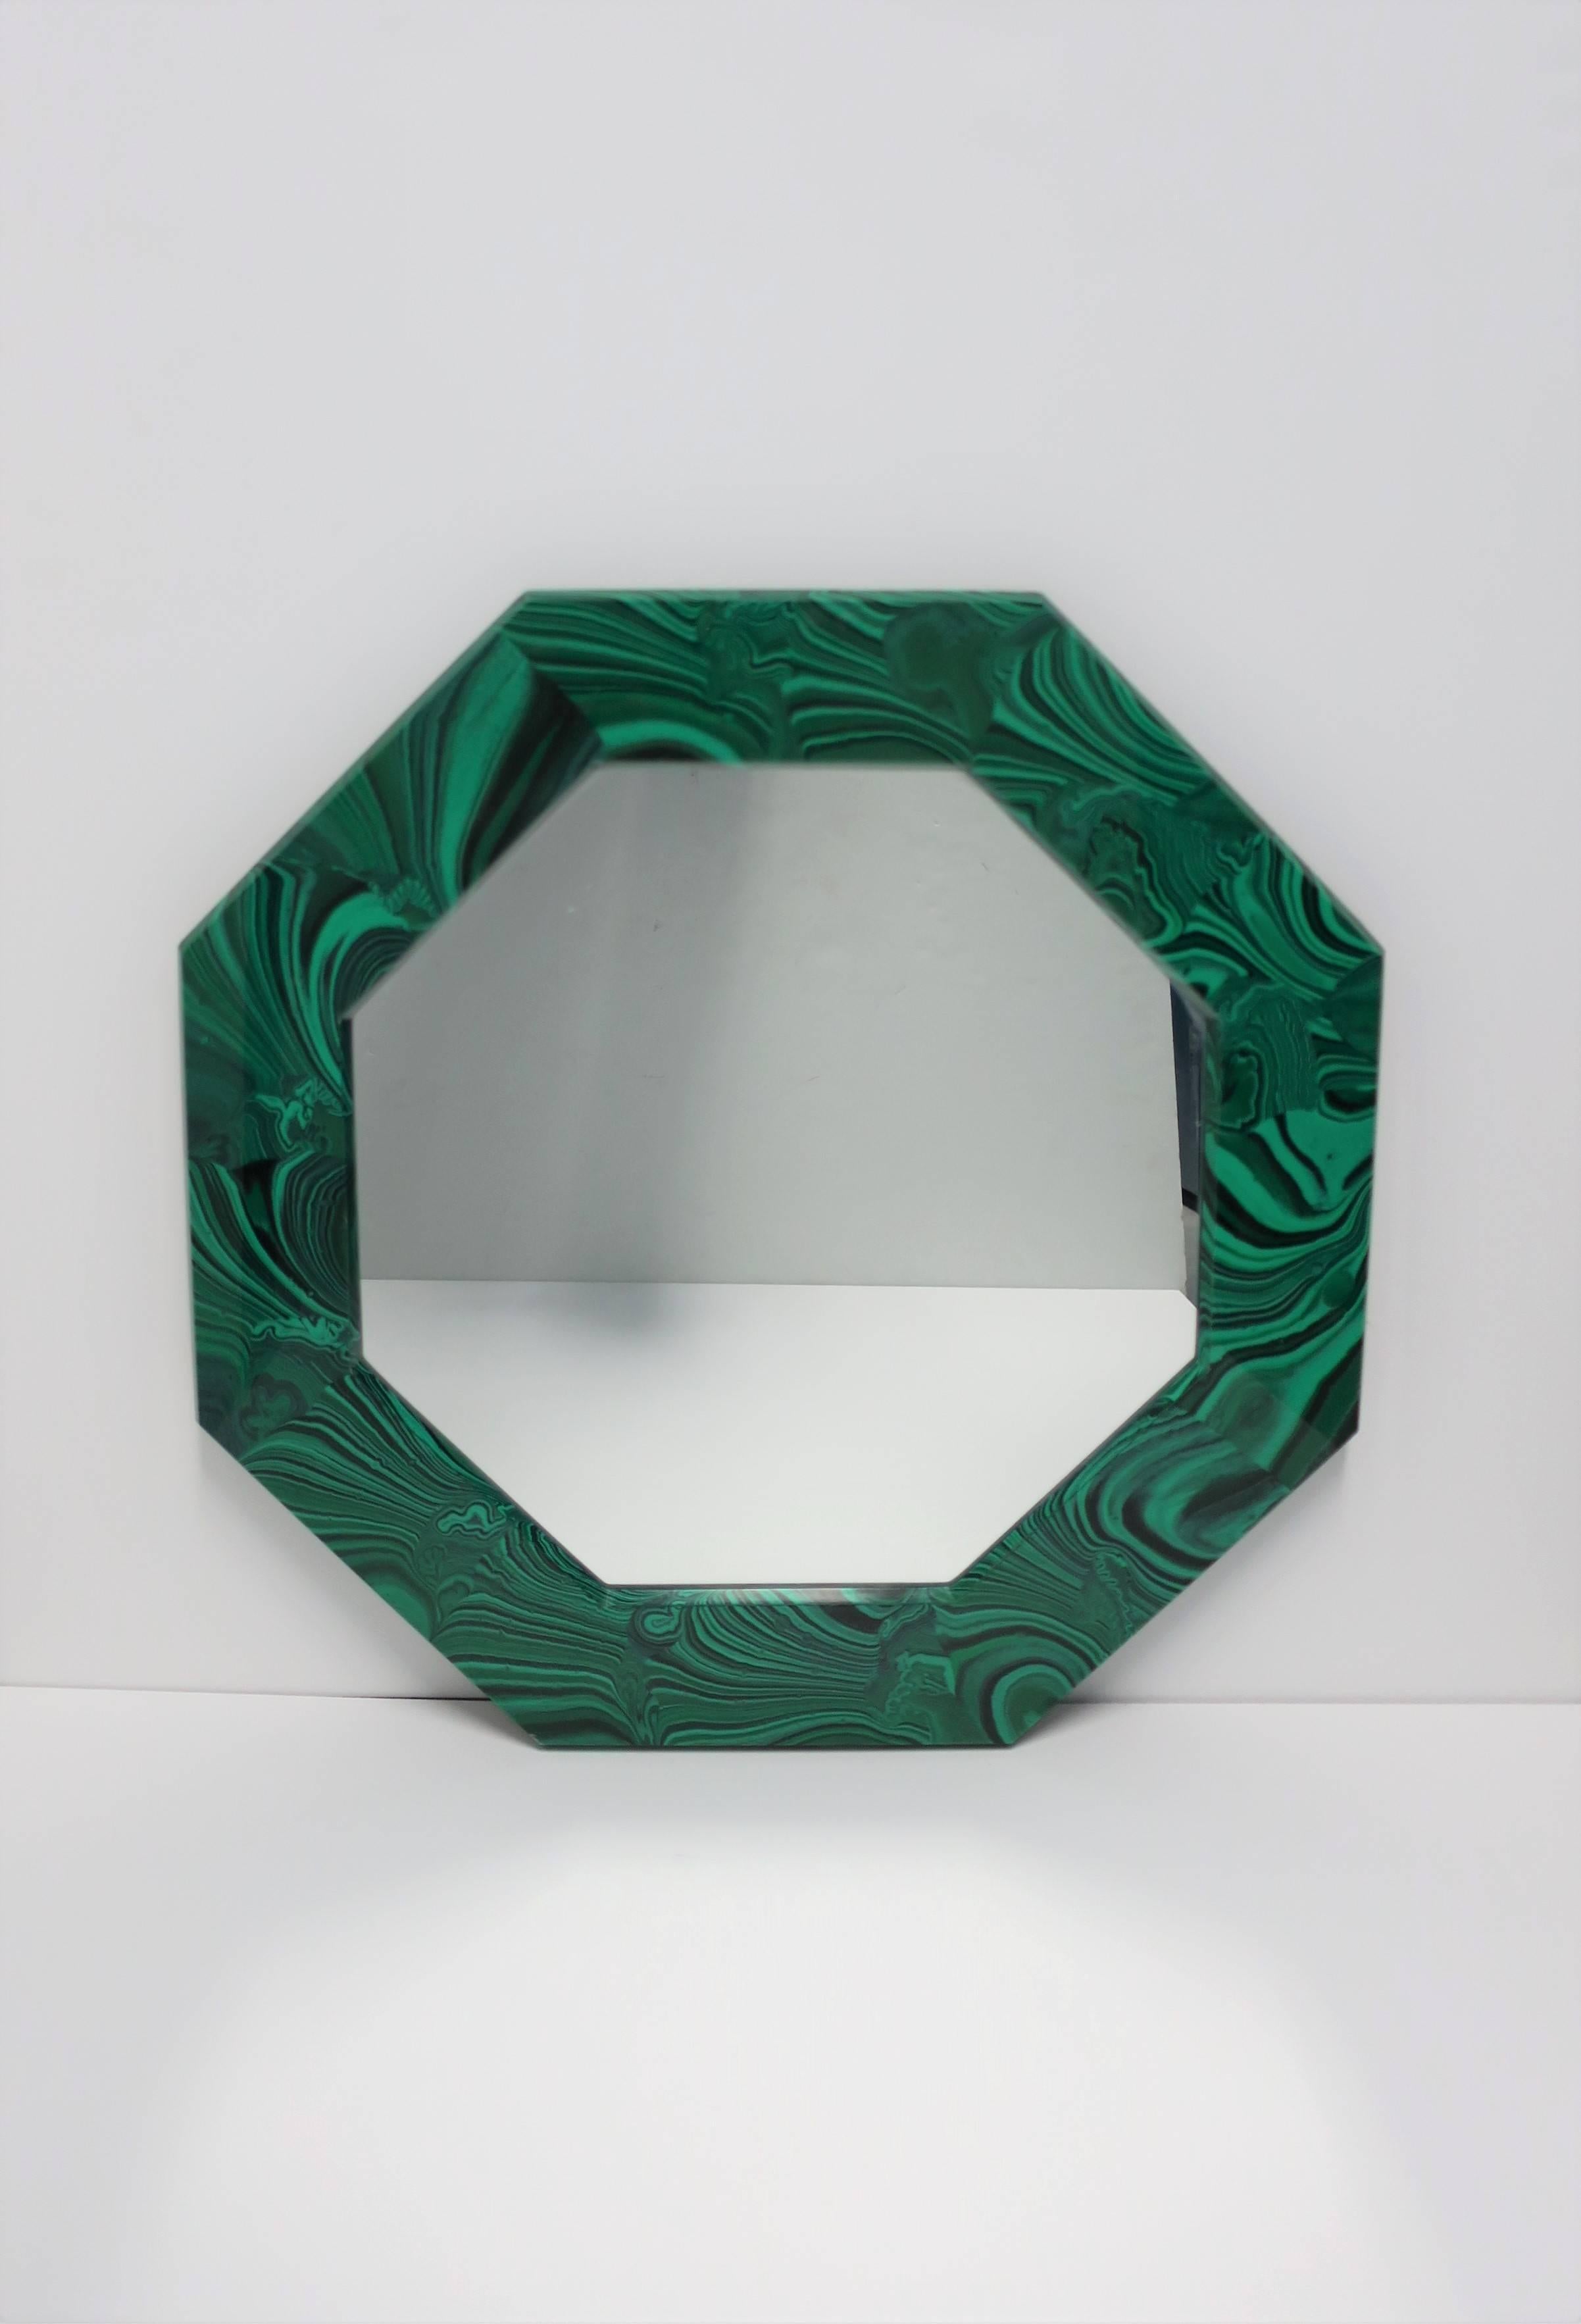 A striking octagonal green malachite resin wall mirror. Mirror can hang in two different positions as show in images #1 and #8, with appropriate hooks on back as show in images #9 and 10. Octagonal shape is a nice alternative to round, and a